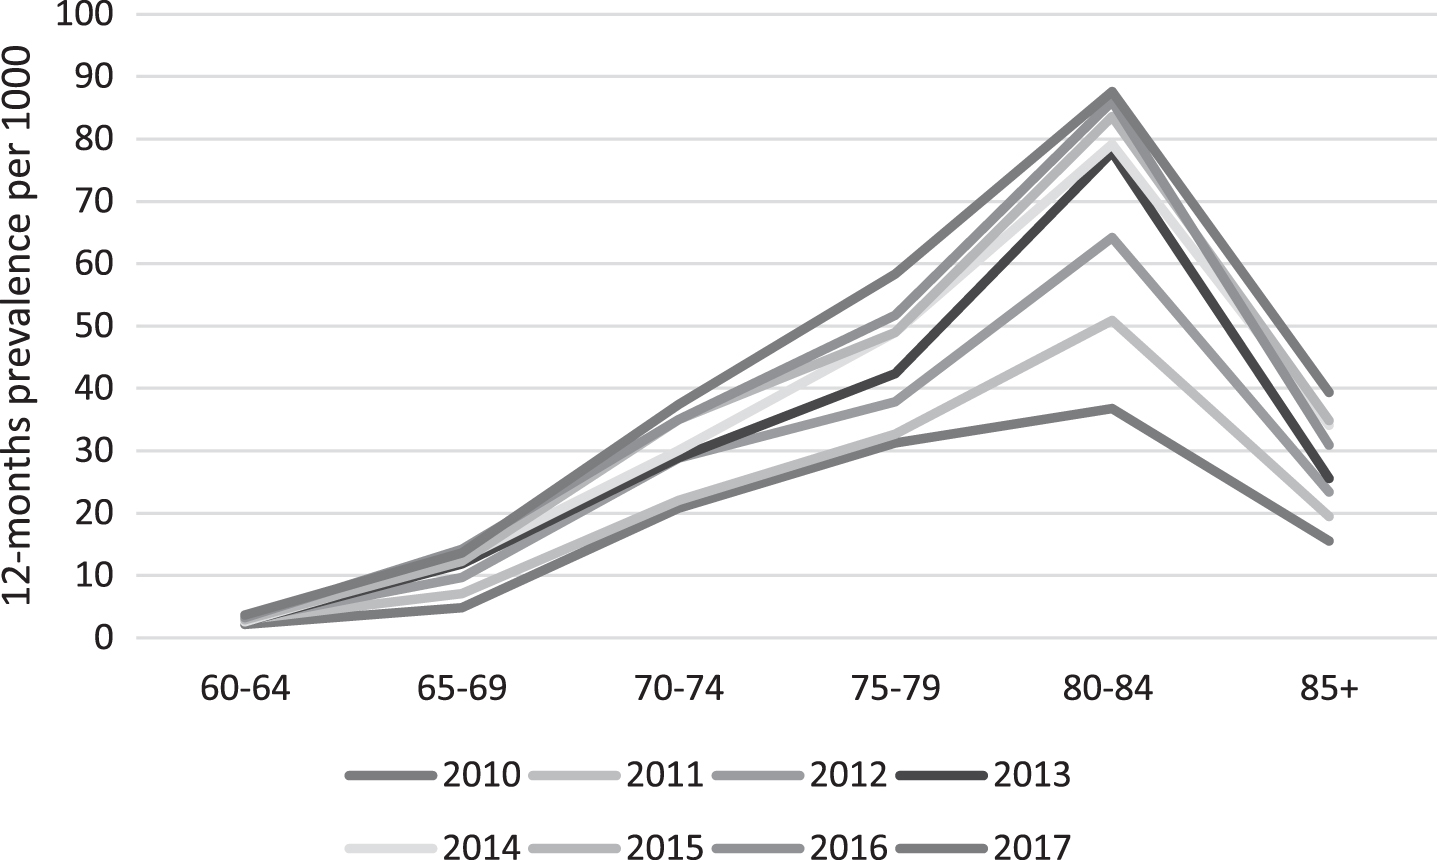 Trend in age-specific, sex-standardized prevalence of dementia in the Faroe Islands, by year. Standardization is done using the 2010 Faroese population as standard.